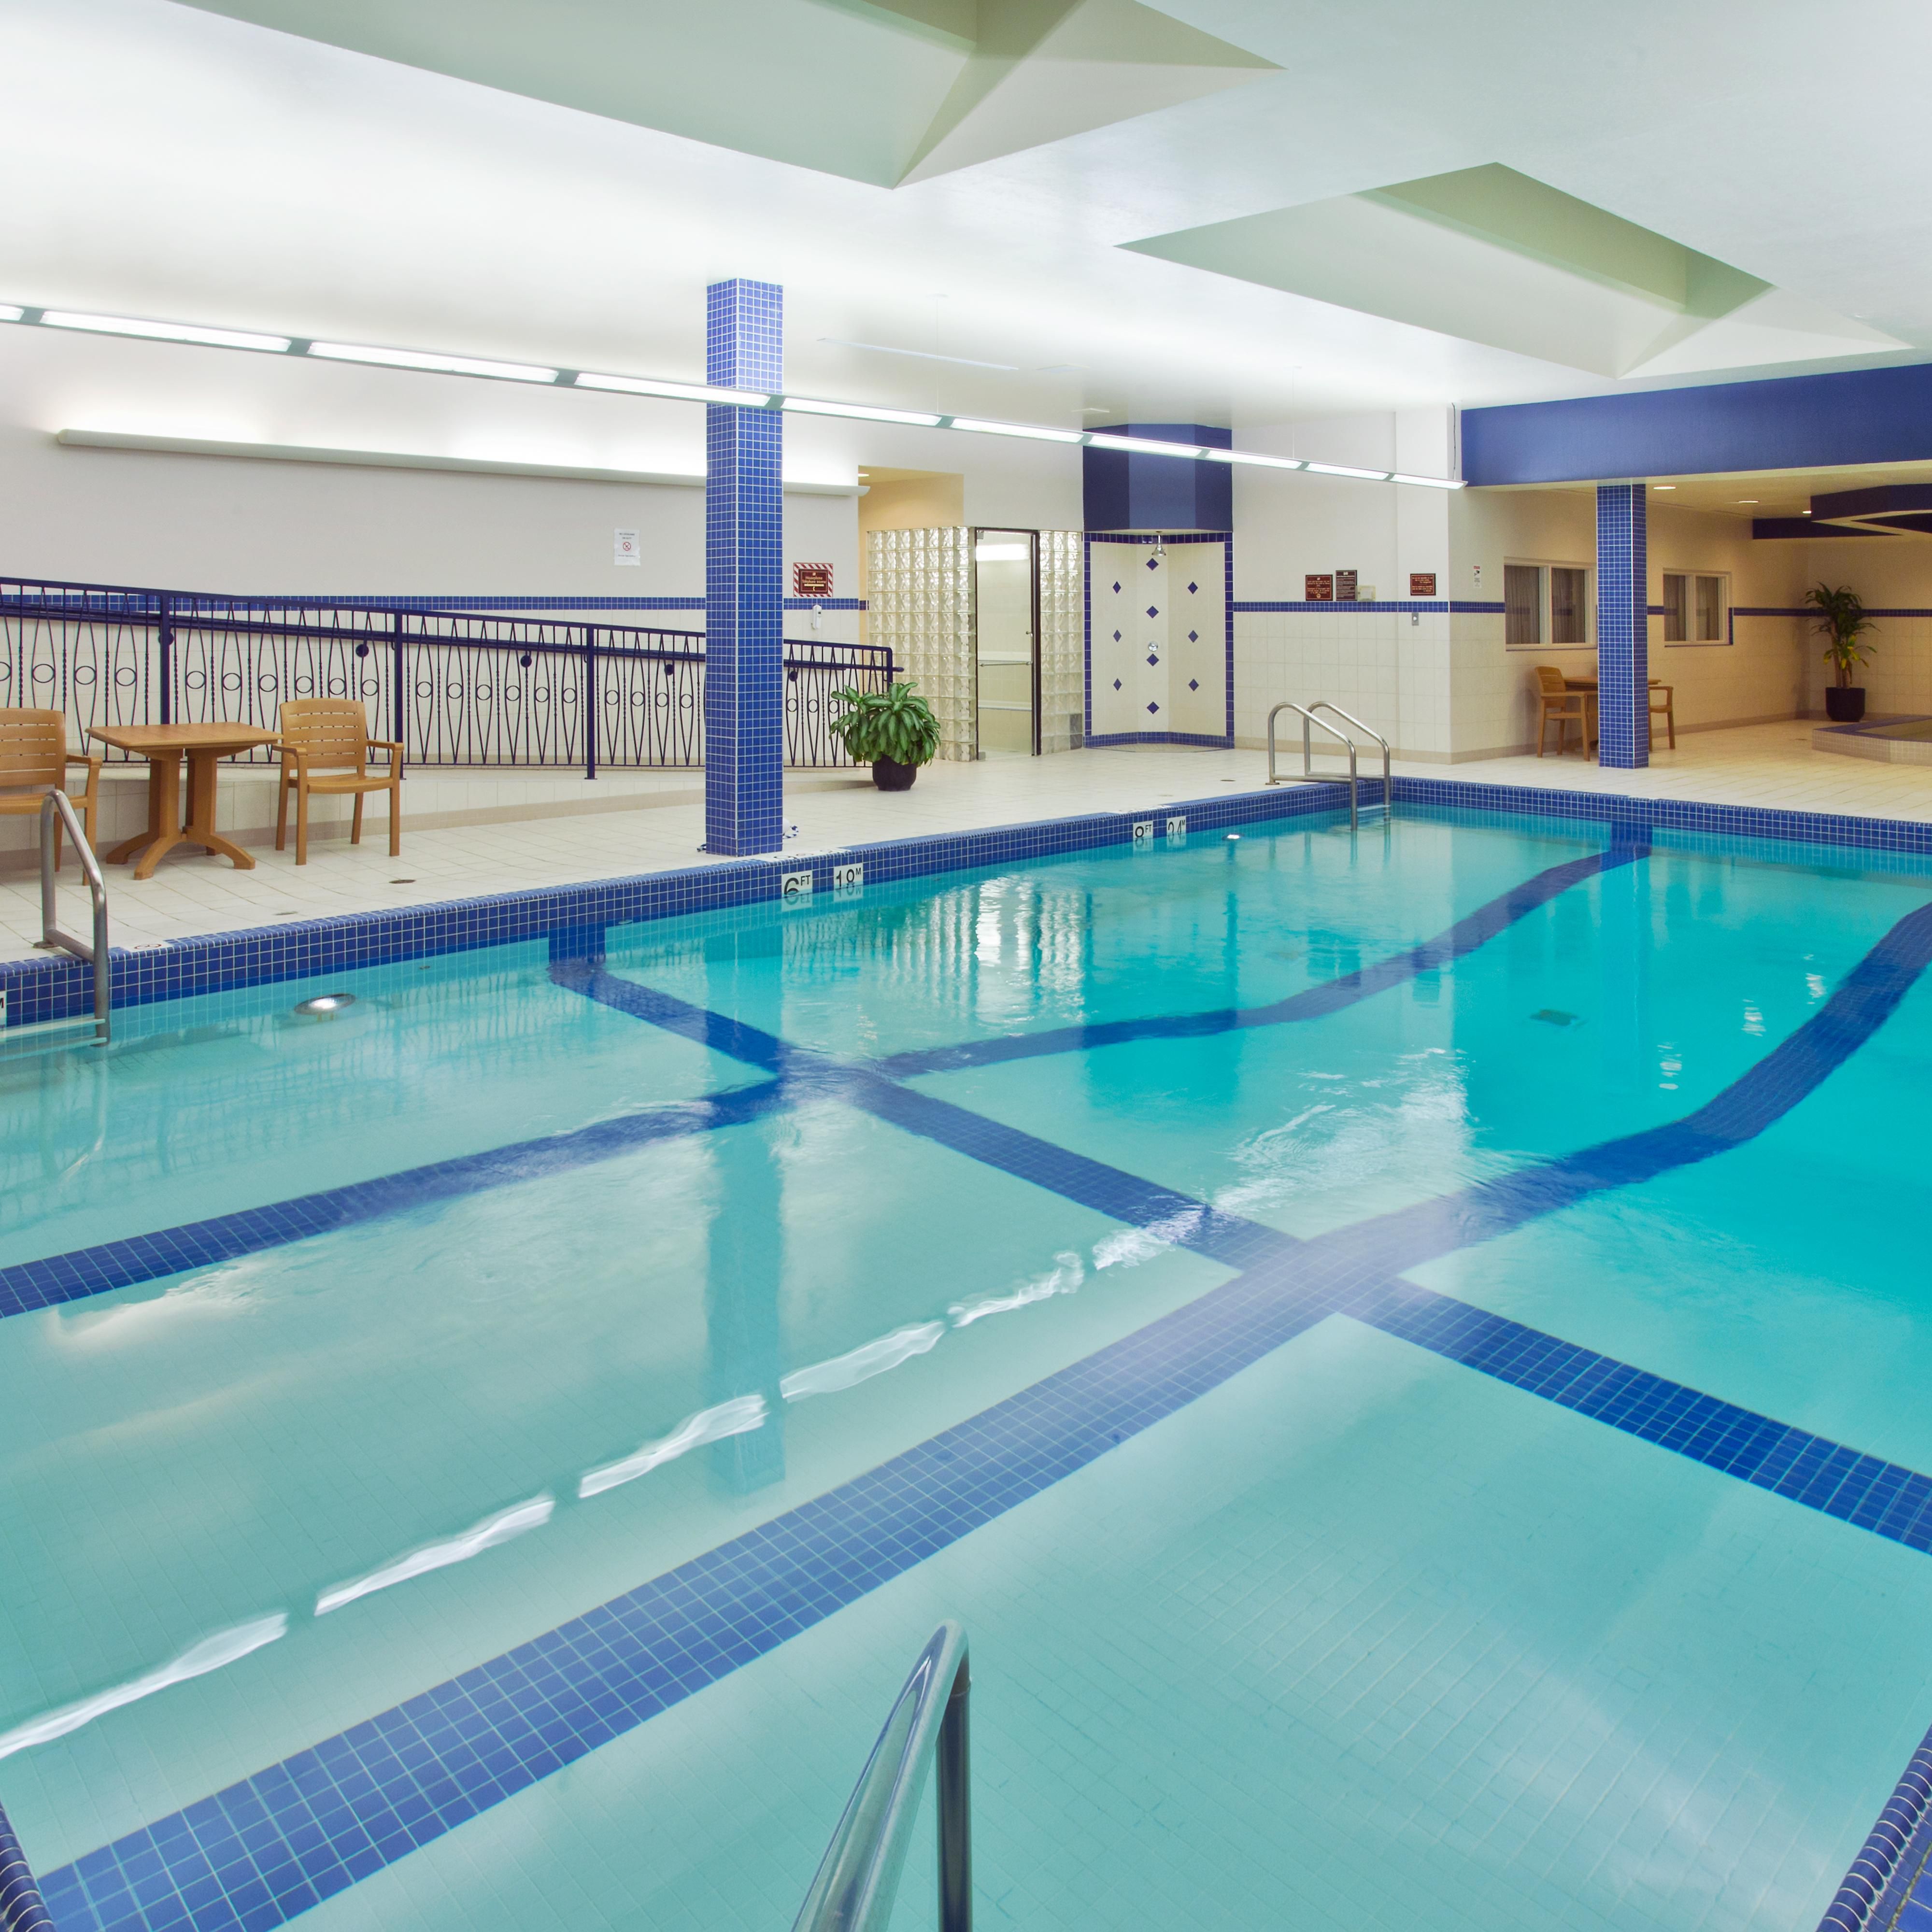 Have a morning or afternoon dip in our indoor swimming pool